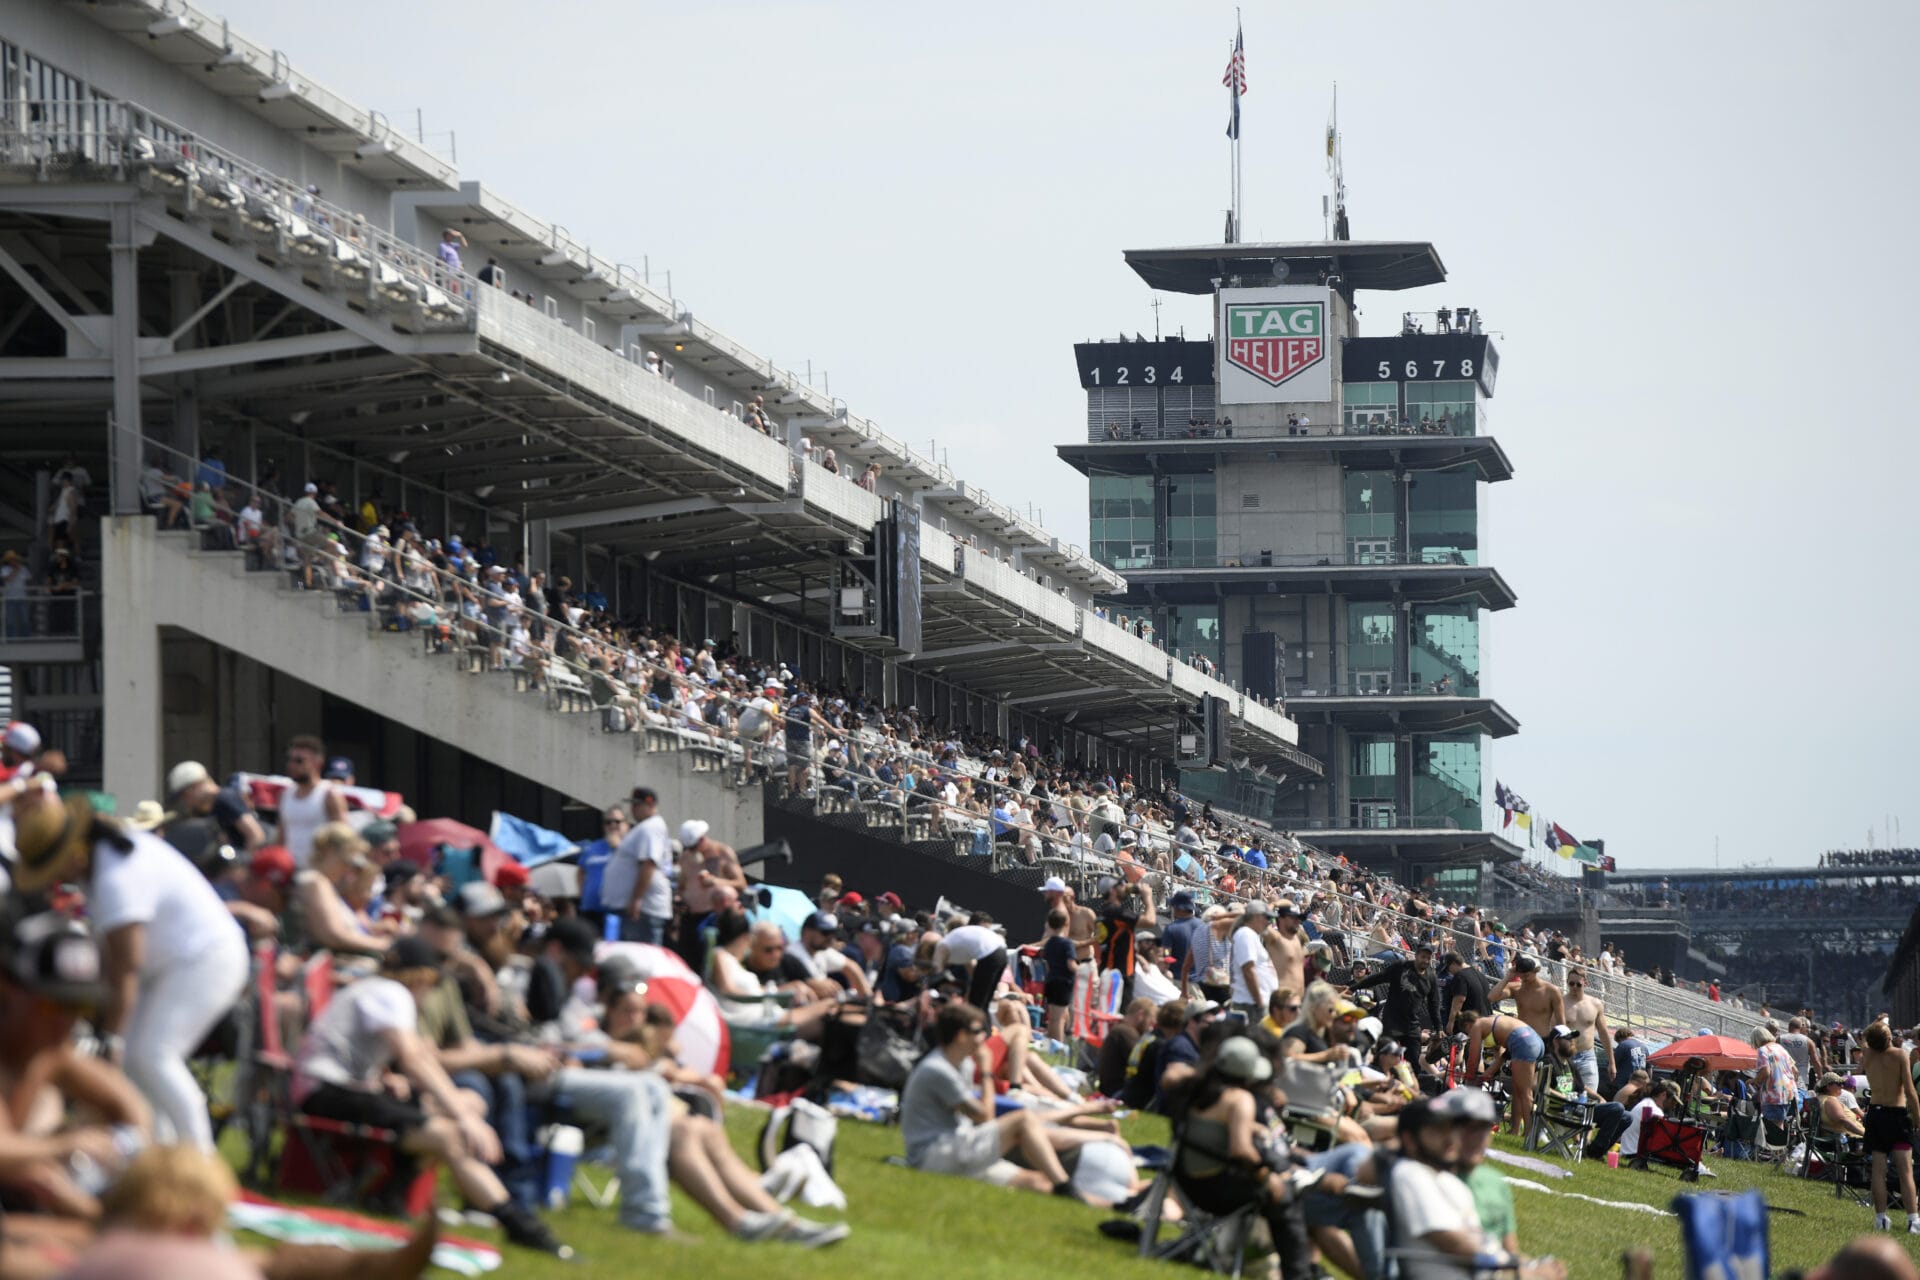 Fans pack the stands and the viewing mounds in front of the pagoda during the NASCAR Cup Series Brickyard 400 on July 21, 2024, at the Indianapolis Motor Speedway in Indianapolis, Indiana. (Photo by Michael Allio/Icon Sportswire via Getty Images)